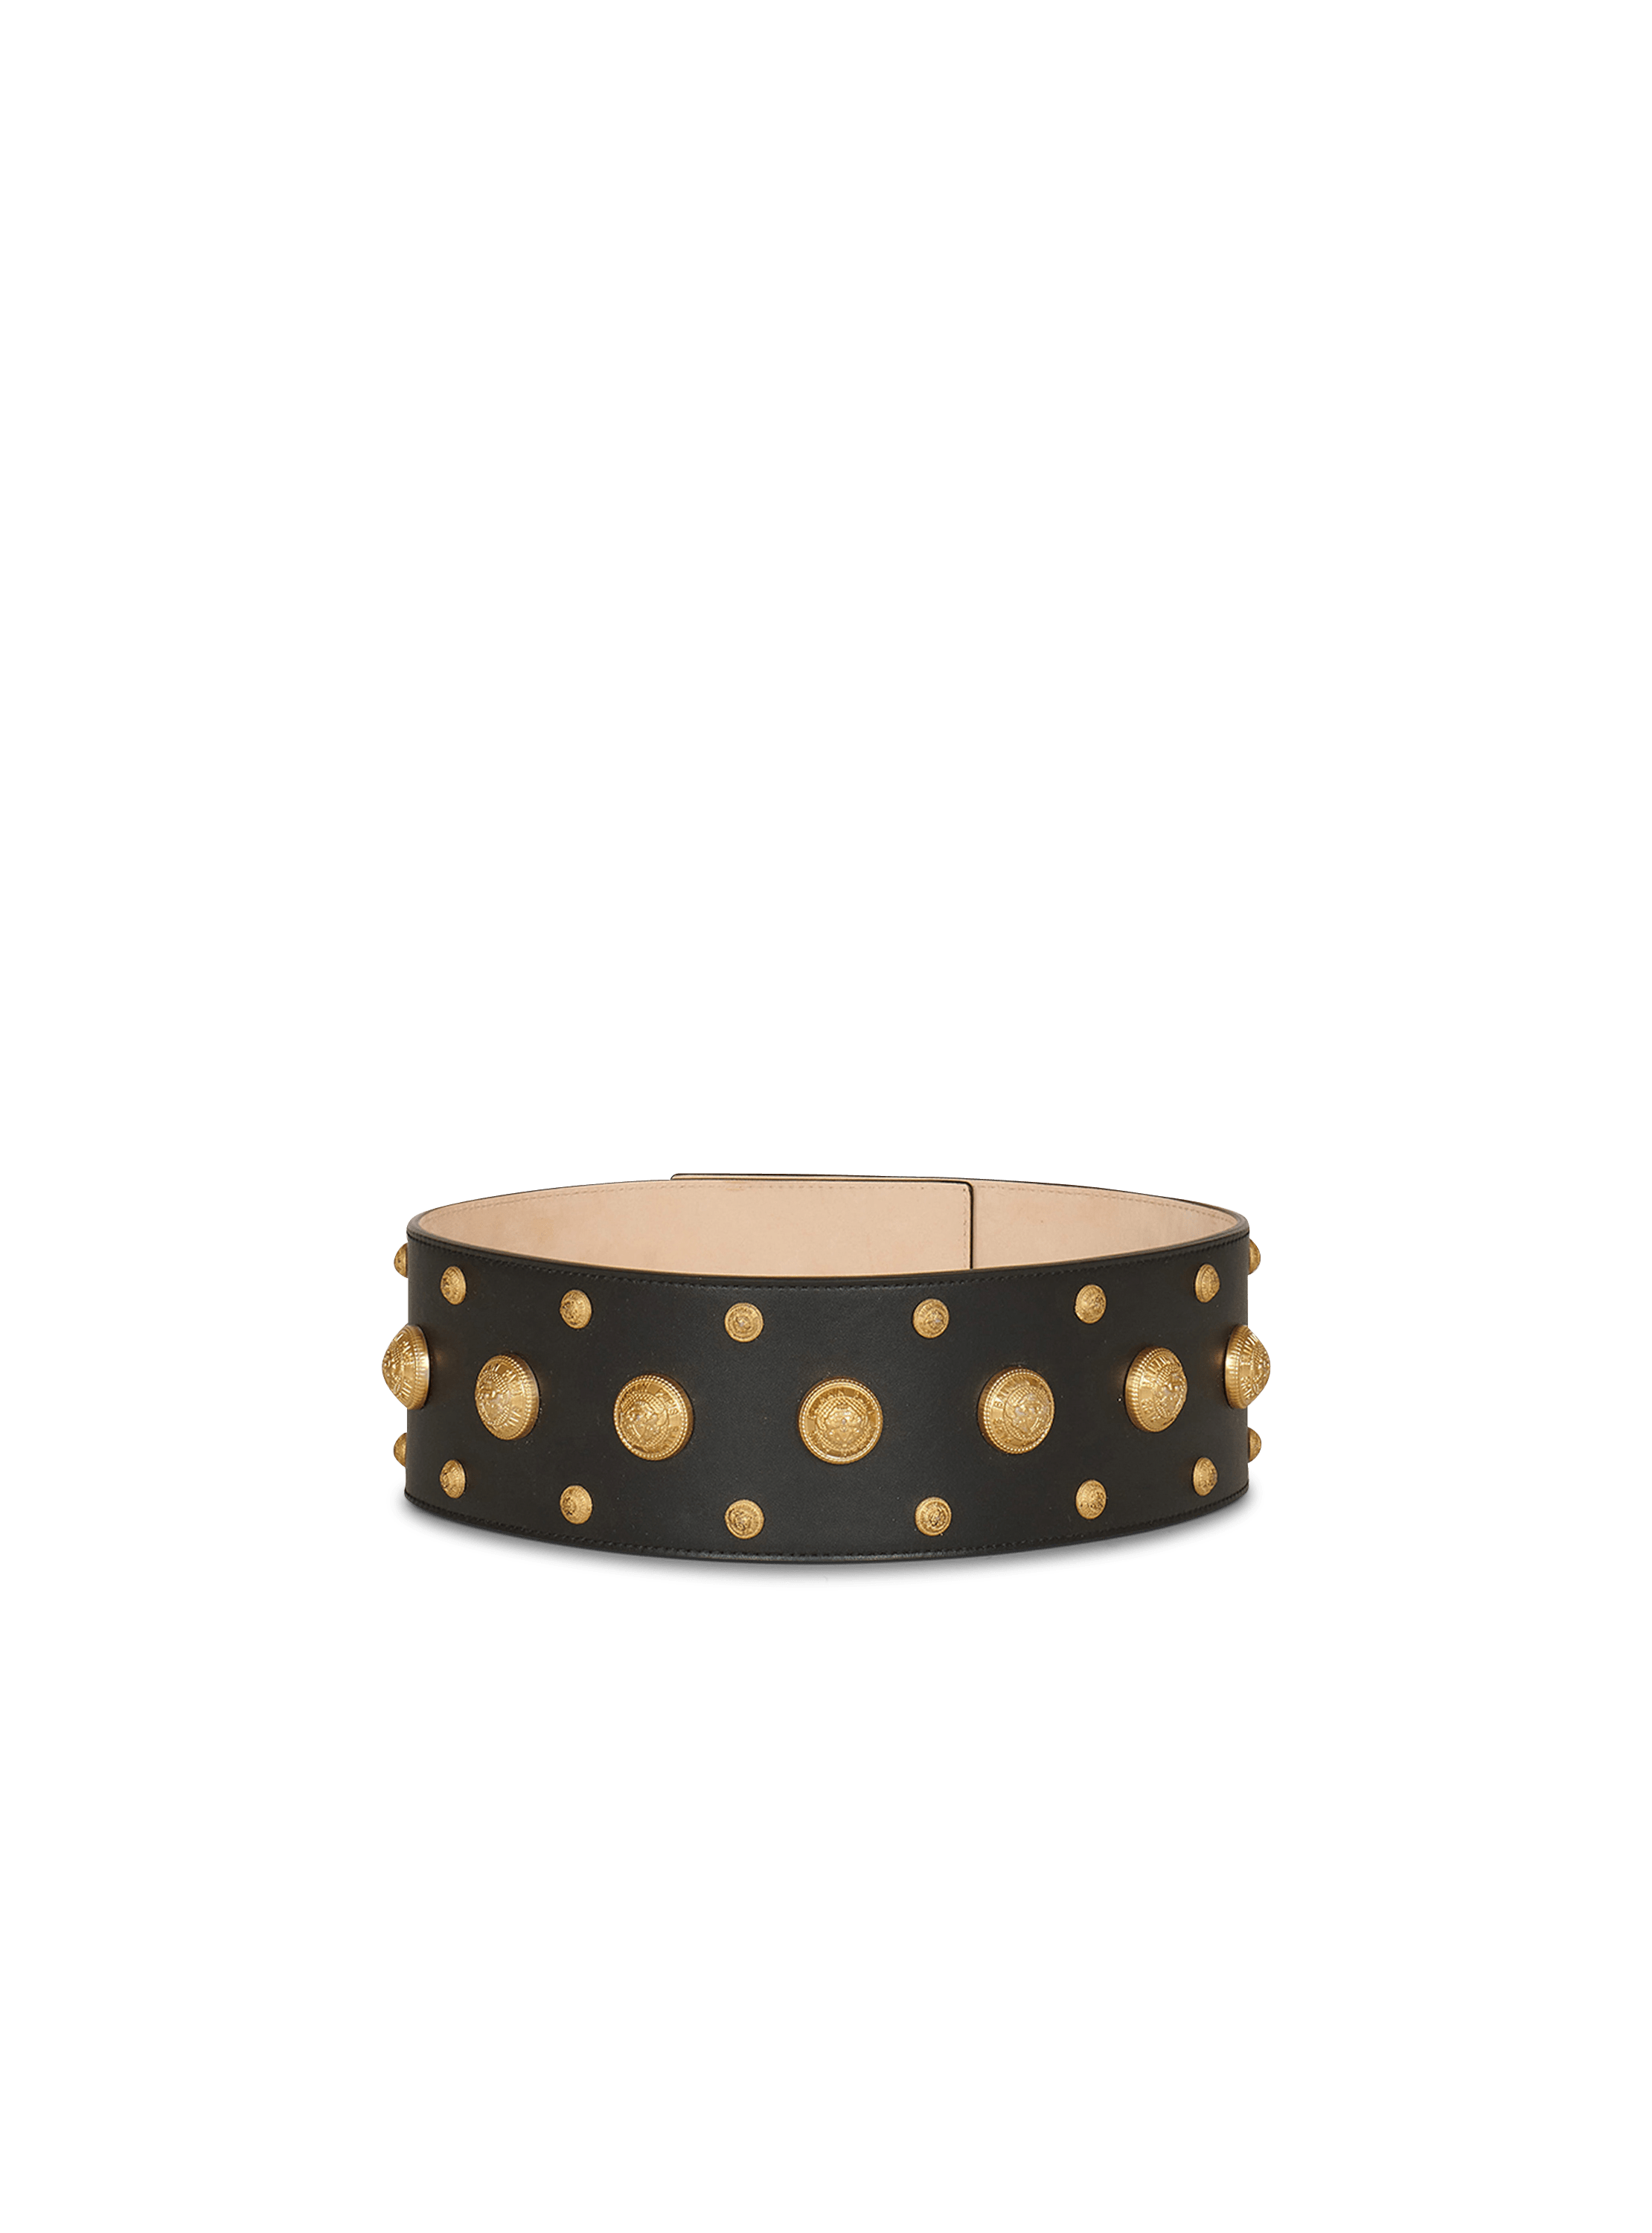 Black leather and gold-tone Coin Belt belt